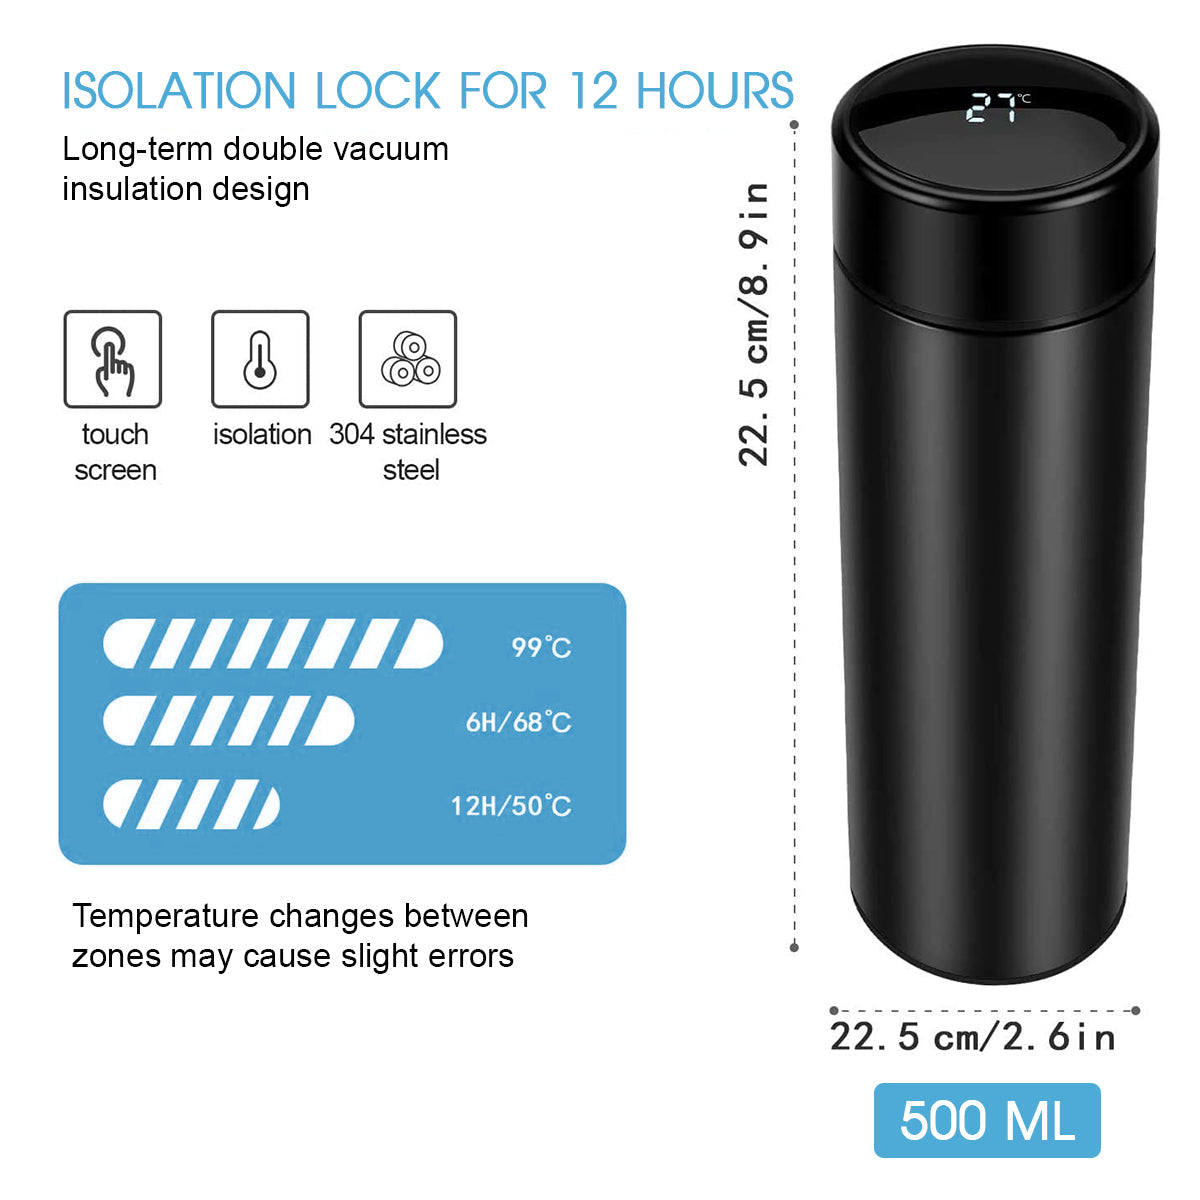 Smart Cup - Intelligent Thermos Cup With LED Temperature Display (500ml) -  Double Walled Vacuum Insulated Bottle, 12-Hour Isolation Lock, Stainless